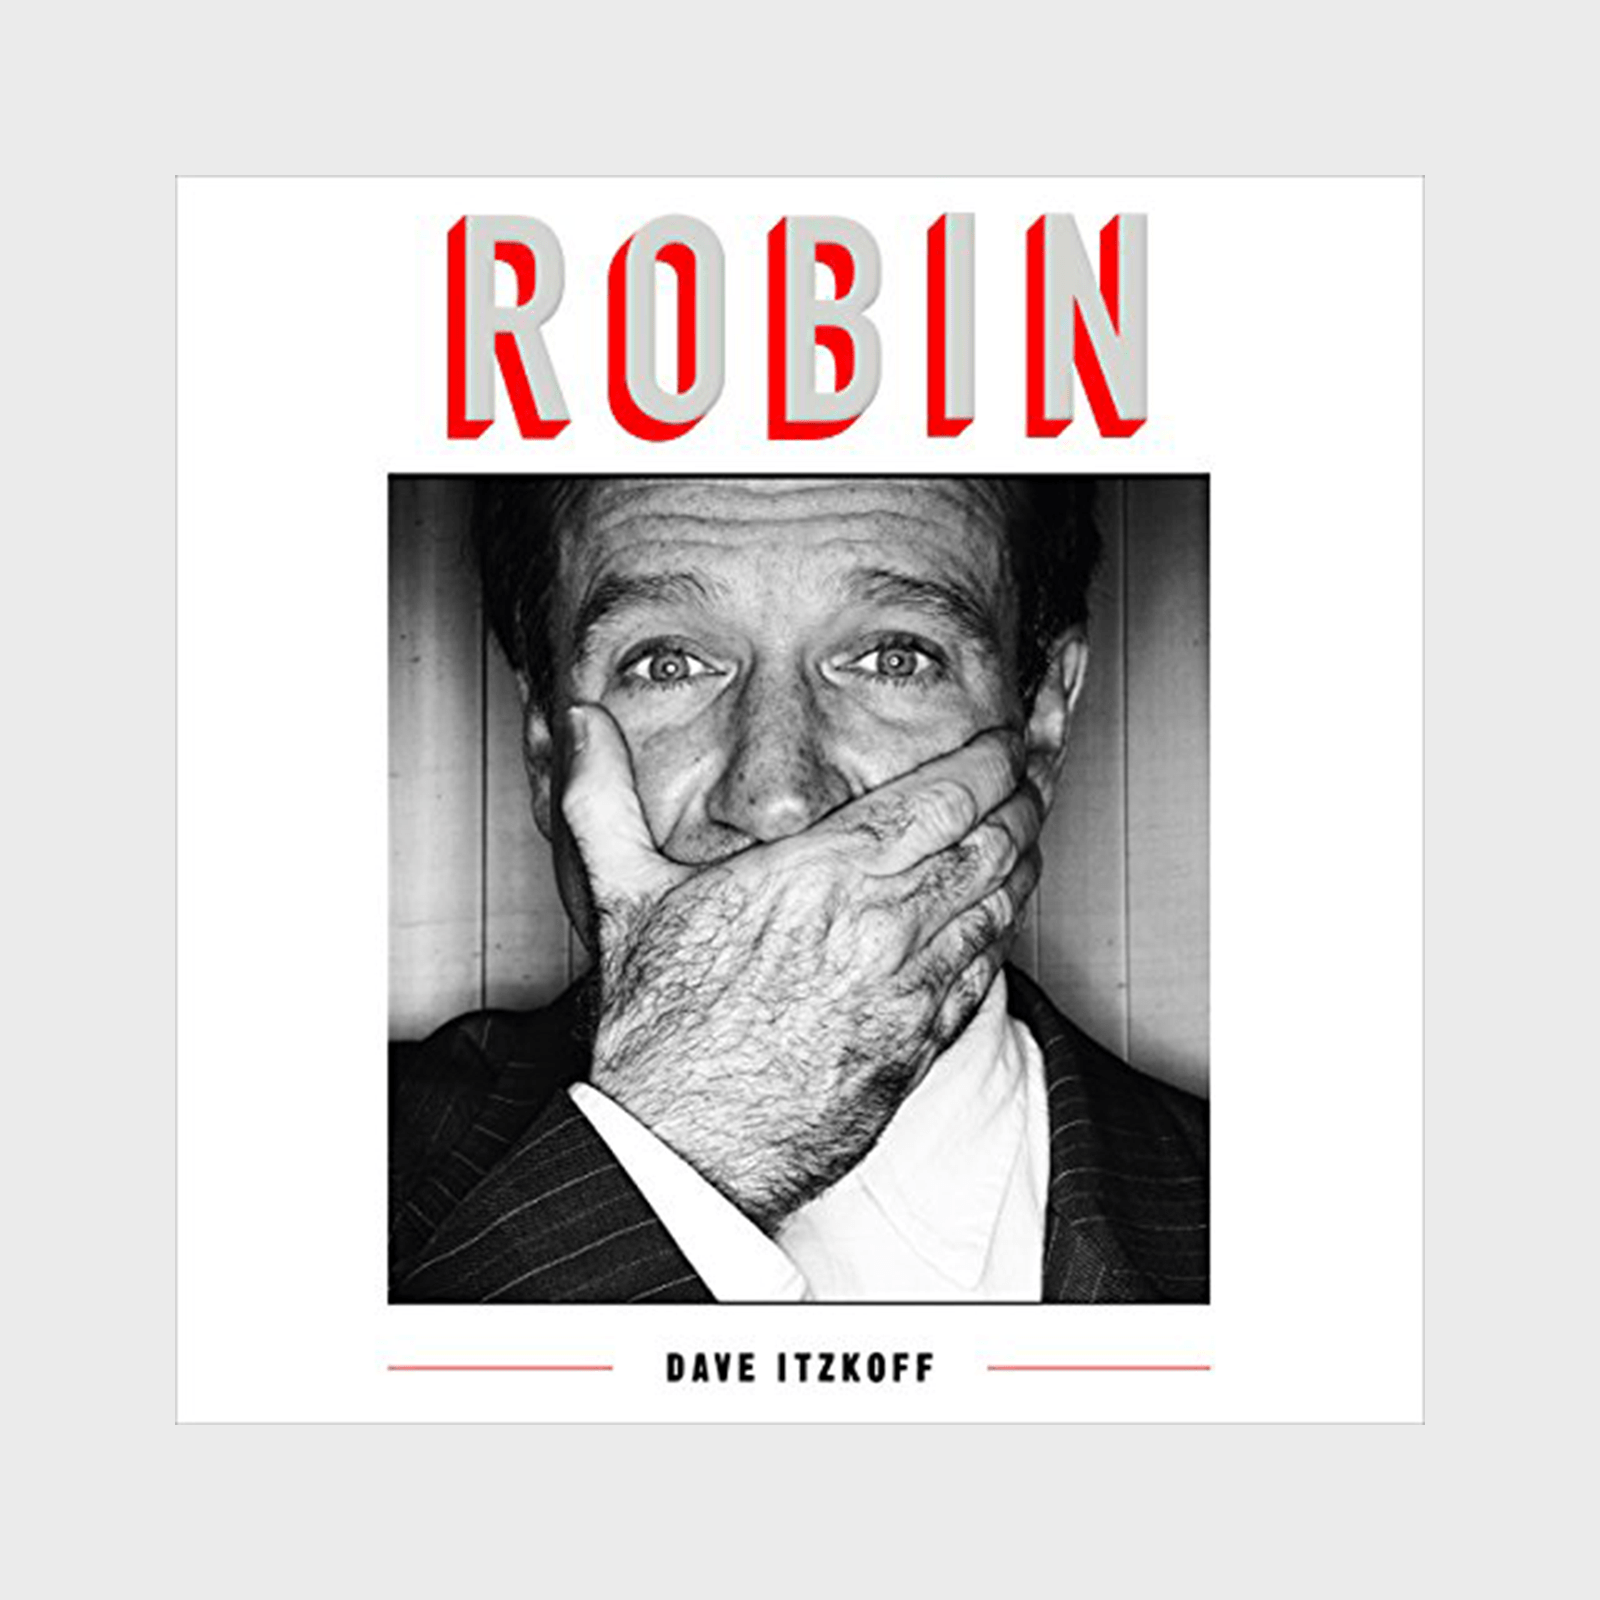 <h3 class=""><strong><em>Robin</em> by Dave Itzkoff</strong></h3> <p>When Robin Williams died in 2014, many of us felt like we lost a member of our own family. Author Dave Itzkoff combed through more than 100 original interviews with Williams's family, friends, and colleagues, and relied on extensive archival research to write this comprehensive <a href="https://www.rd.com/list/best-biographies/" rel="noopener noreferrer">biography</a> that delves into the life of the beloved comedian. Covering everything from Williams's unparalleled talent to his struggles with addiction and depression, <em><a href="https://www.amazon.com/Robin-Dave-Itzkoff-audiobook/dp/B07BB62KSZ" rel="noopener noreferrer">Robin</a></em> paints a stunning portrait of the legend that is Robin Williams.</p> <p class="listicle-page__cta-button-shop"><a class="shop-btn" href="https://www.amazon.com/Robin-Dave-Itzkoff-audiobook/dp/B07BB62KSZ">Shop Now</a></p>